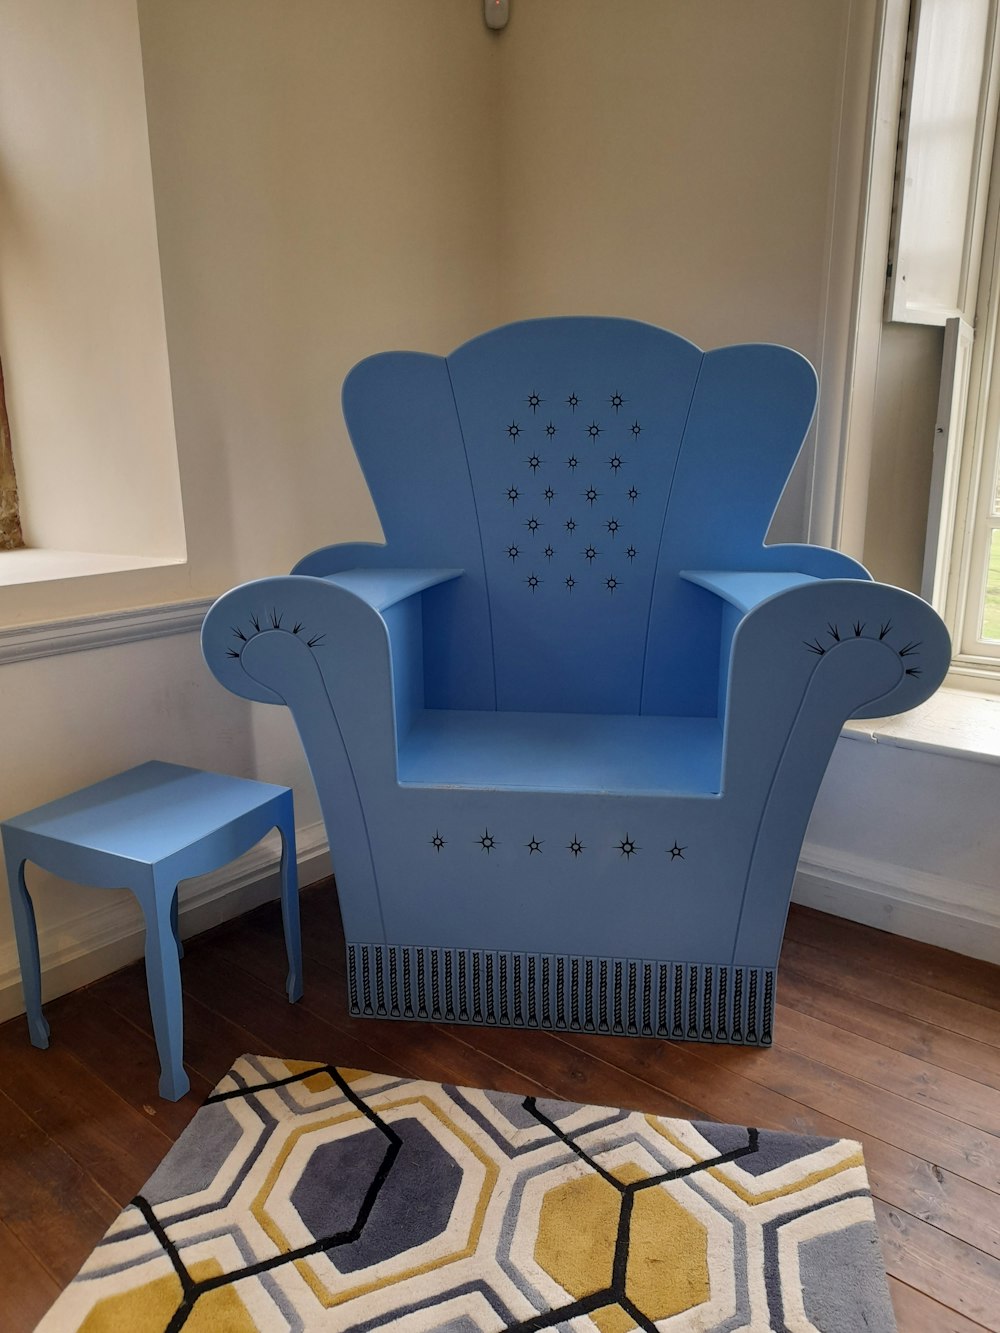 a blue chair in a room